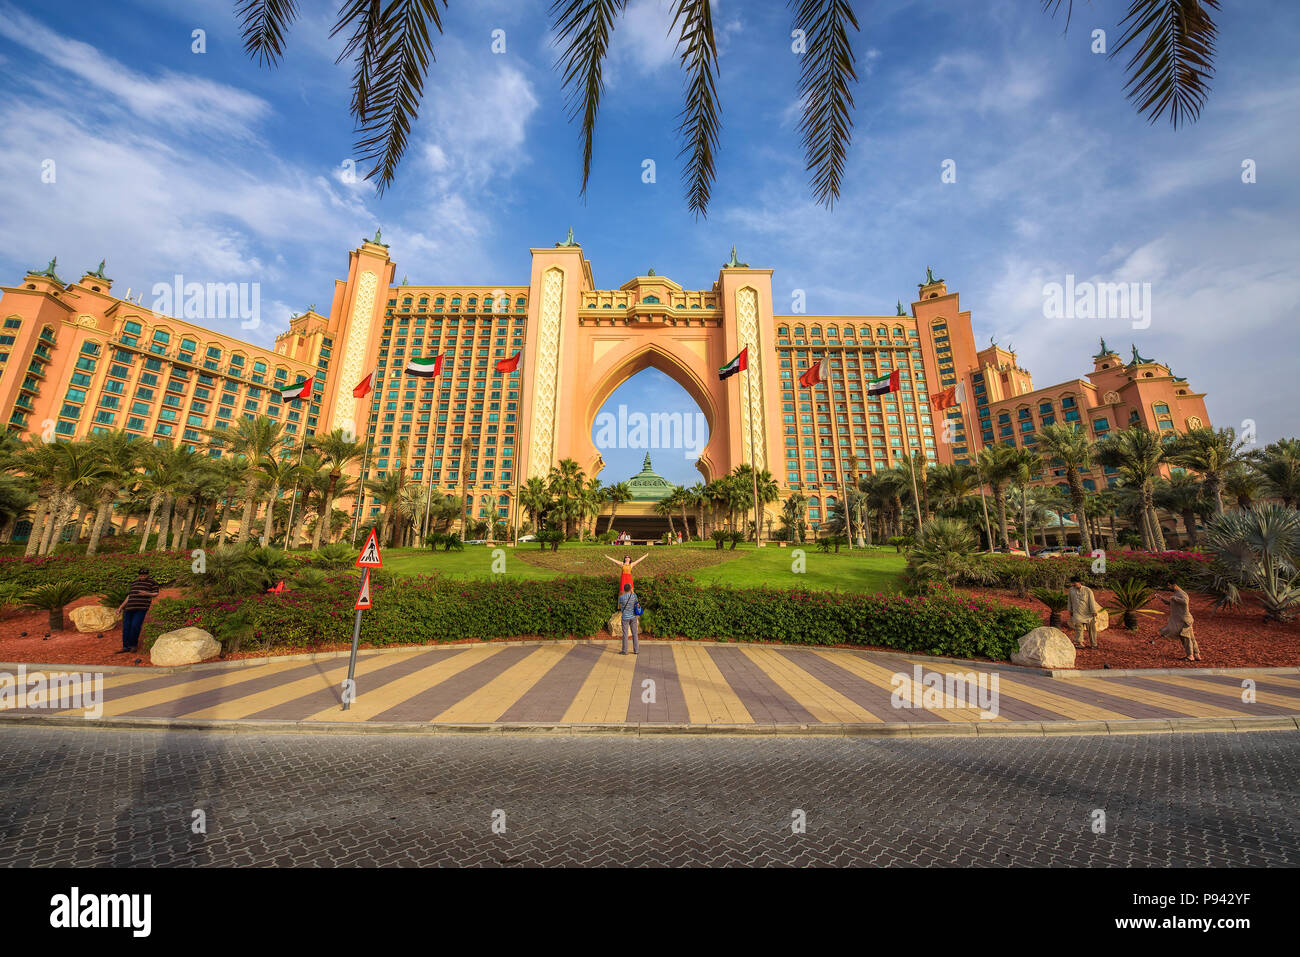 Atlantis, The Palm hotel located at the apex of the Palm Jumeira Stock Photo